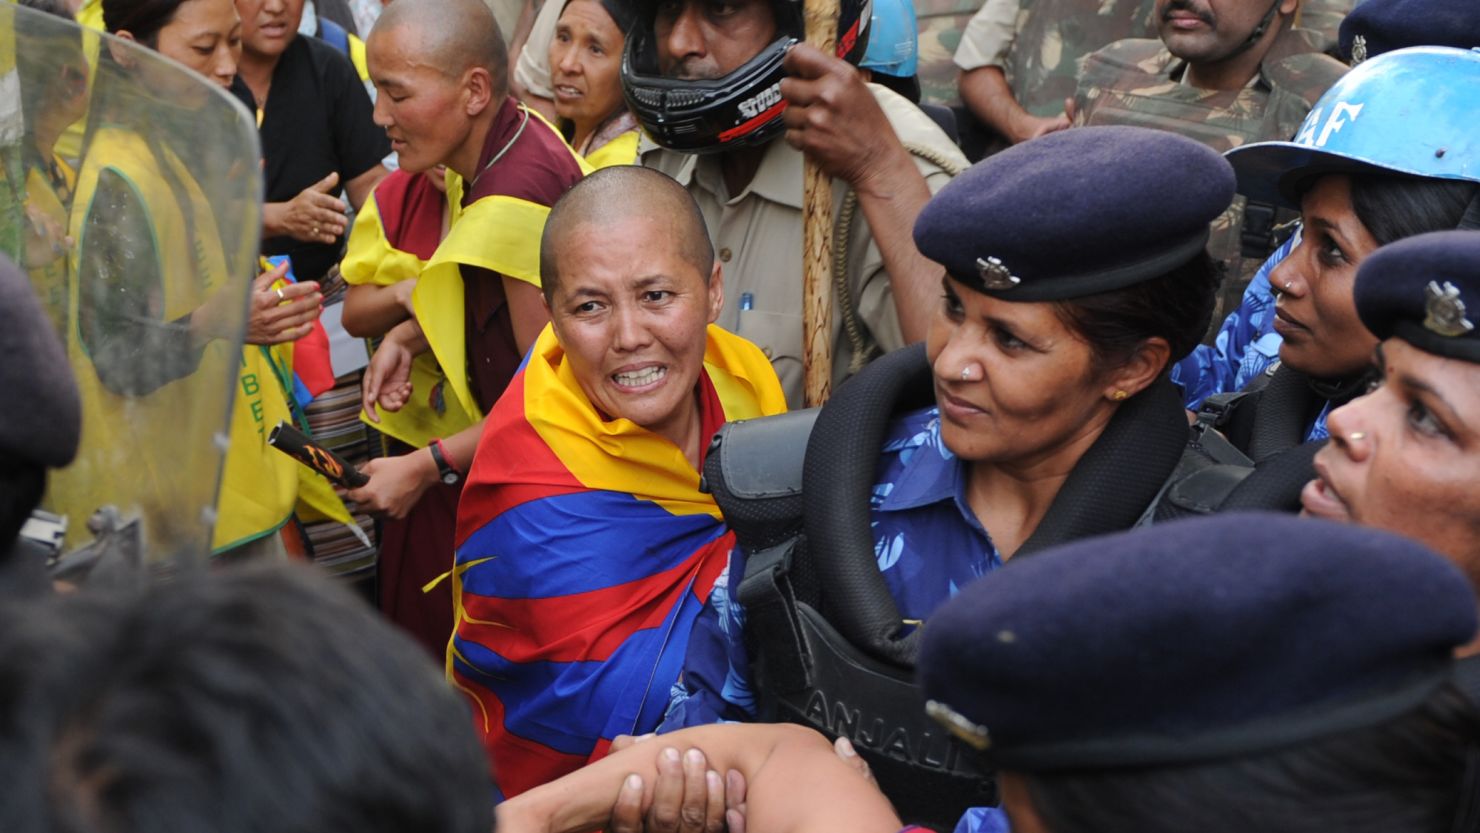 Indian police personnel pushed detained Tibetan protestors onto a bus during a demonstration in New Delhi on March 26. 